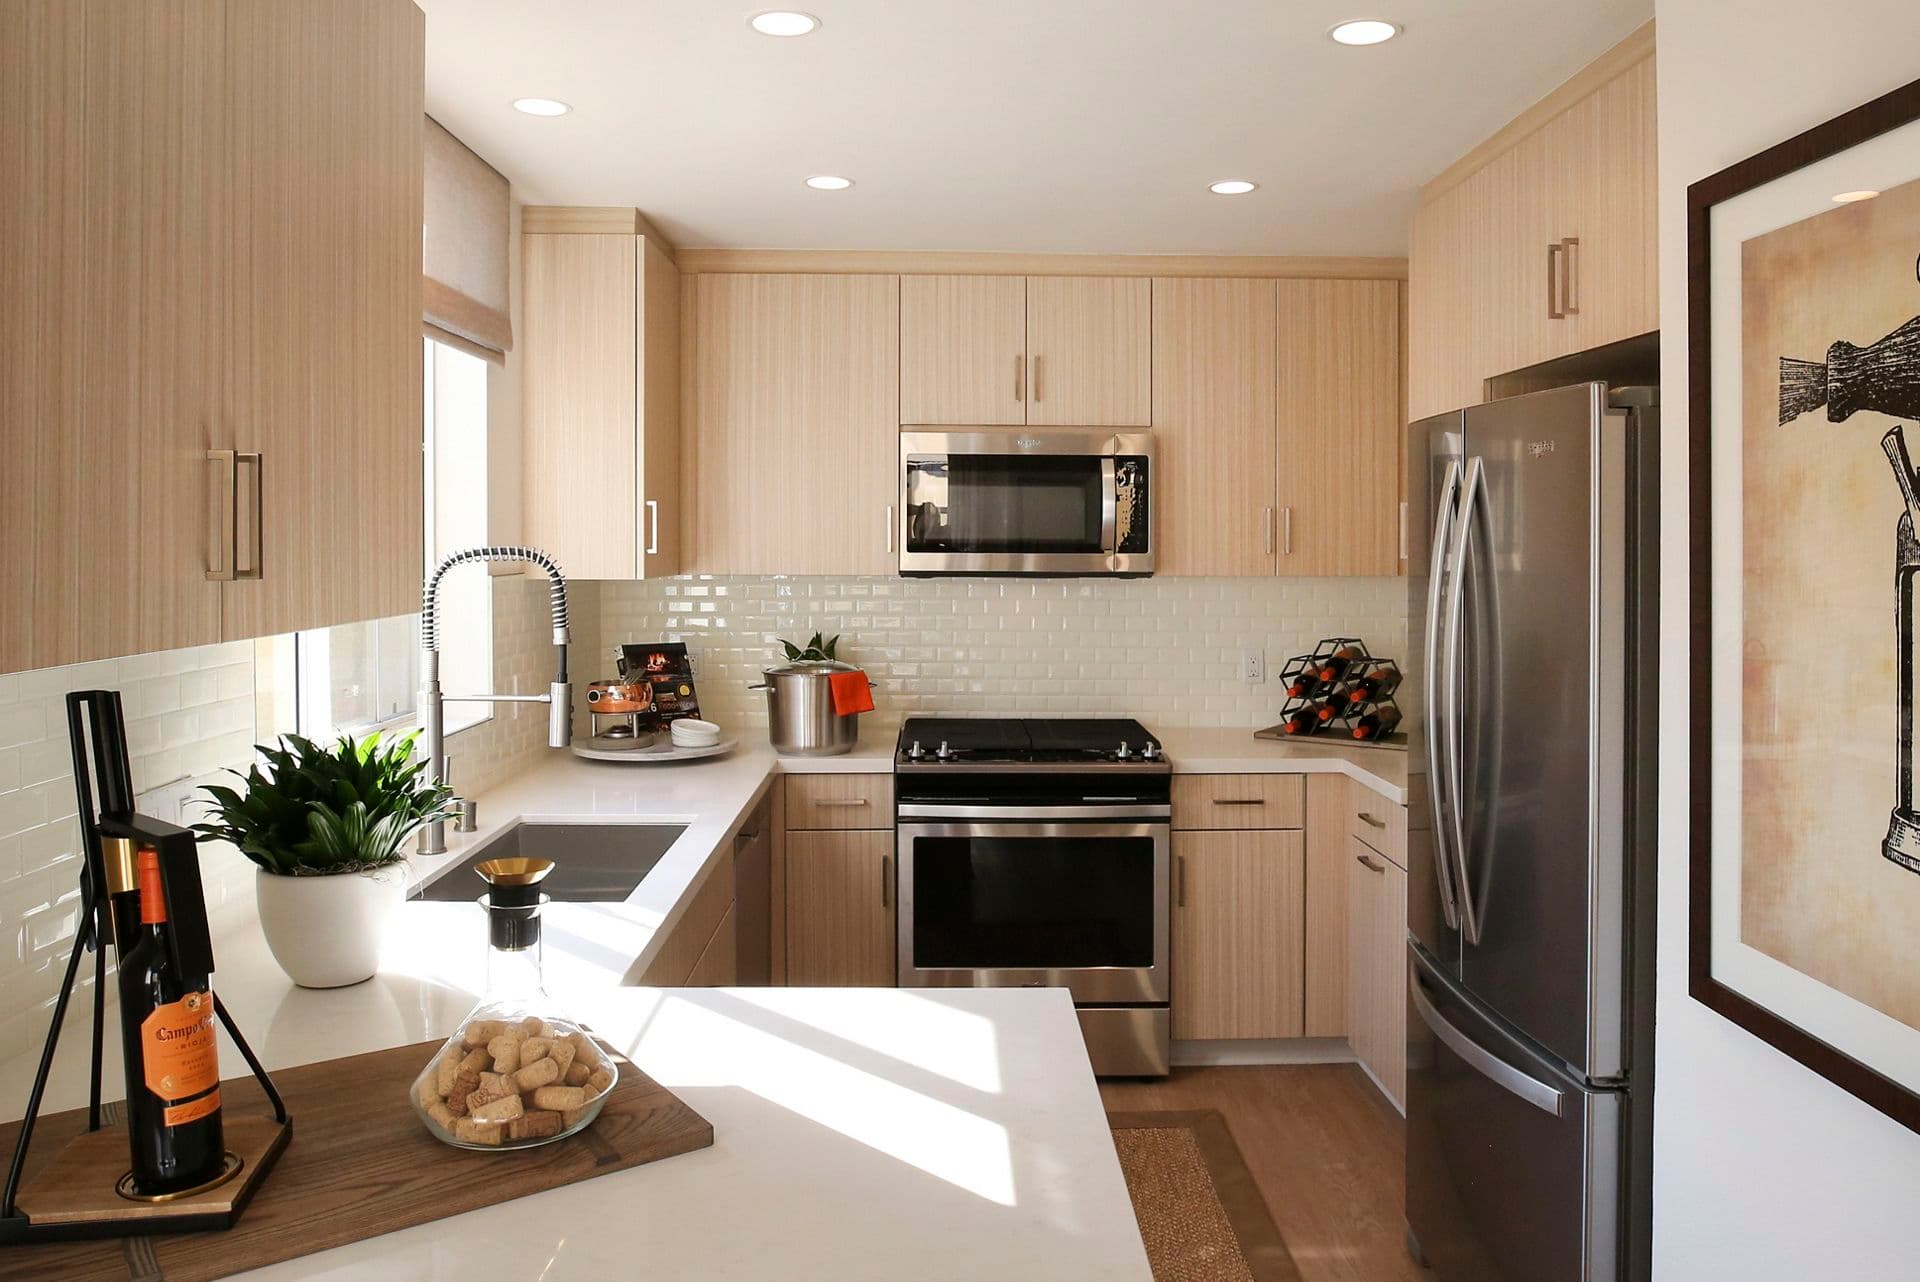 Interior view of kitchen at Baypointe Apartment Homes in Newport Beach, CA.